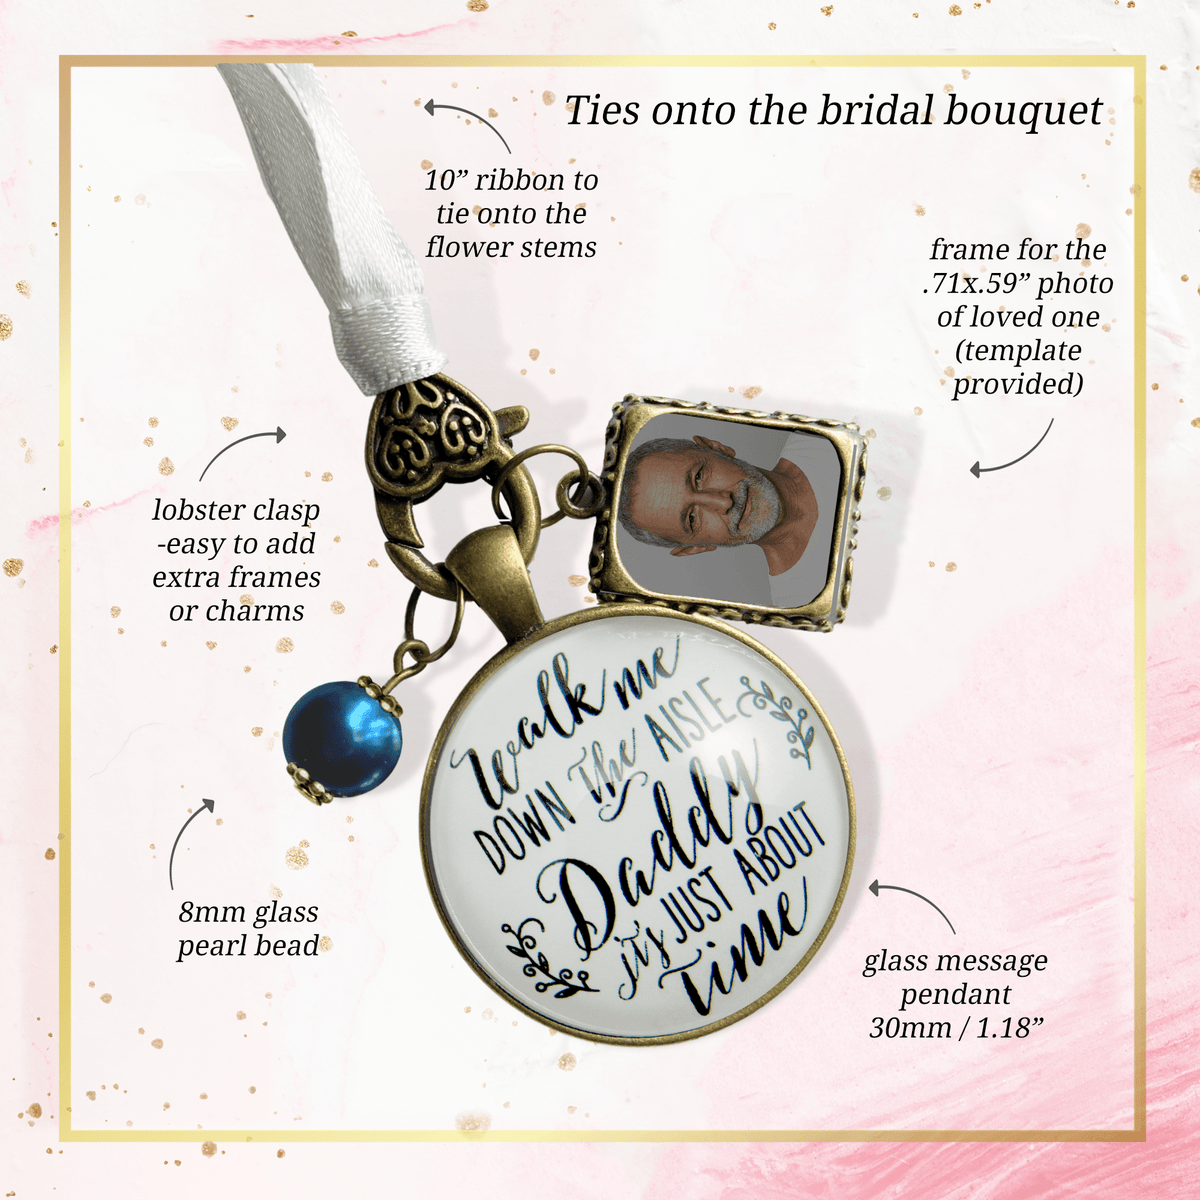 Wedding Bouquet Charm Walk Me Down Aisle Daddy Rustic Memory White Blue Photo Frame - Gutsy Goodness;Wedding Bouquet Charm Walk Me Down Aisle Daddy Rustic Memory White Blue Photo Frame - Gutsy Goodness Handmade Jewelry Gifts